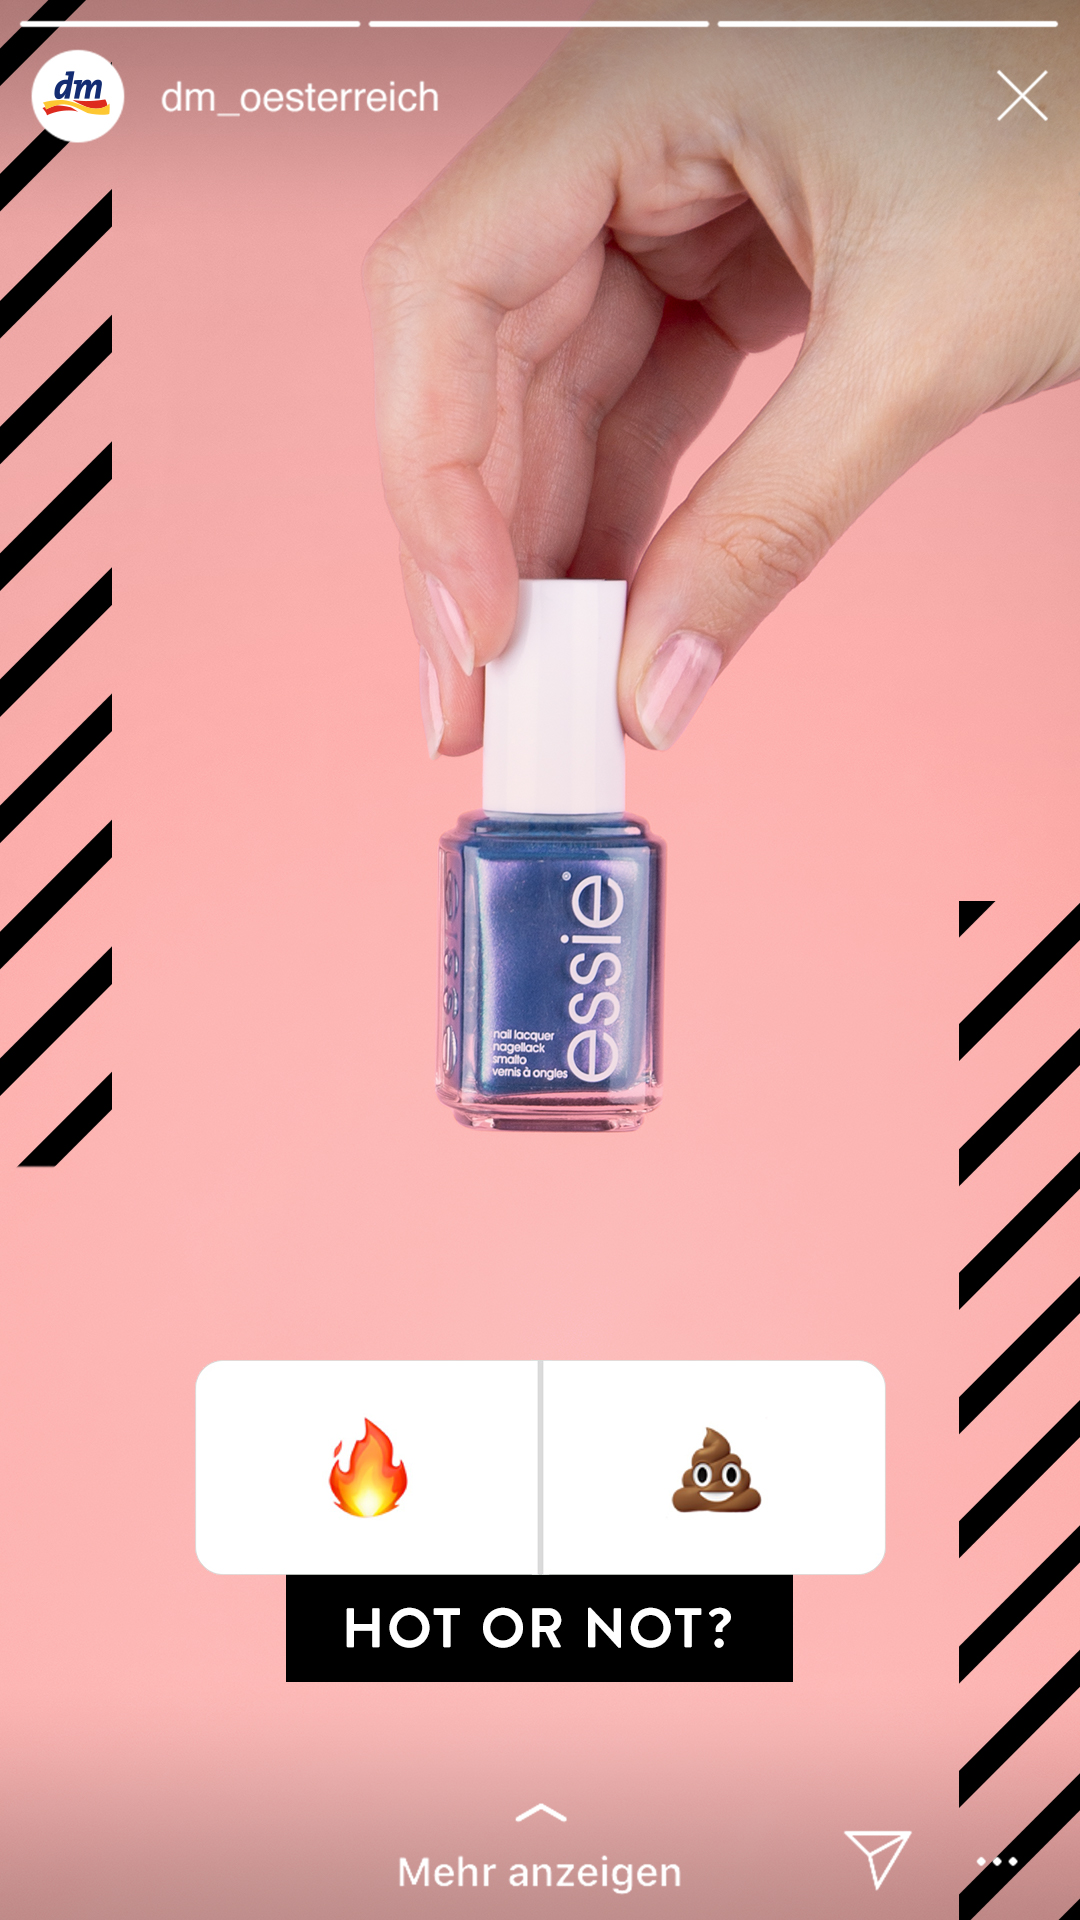 181214_dm_at_Glow_story_hot-not_Essie